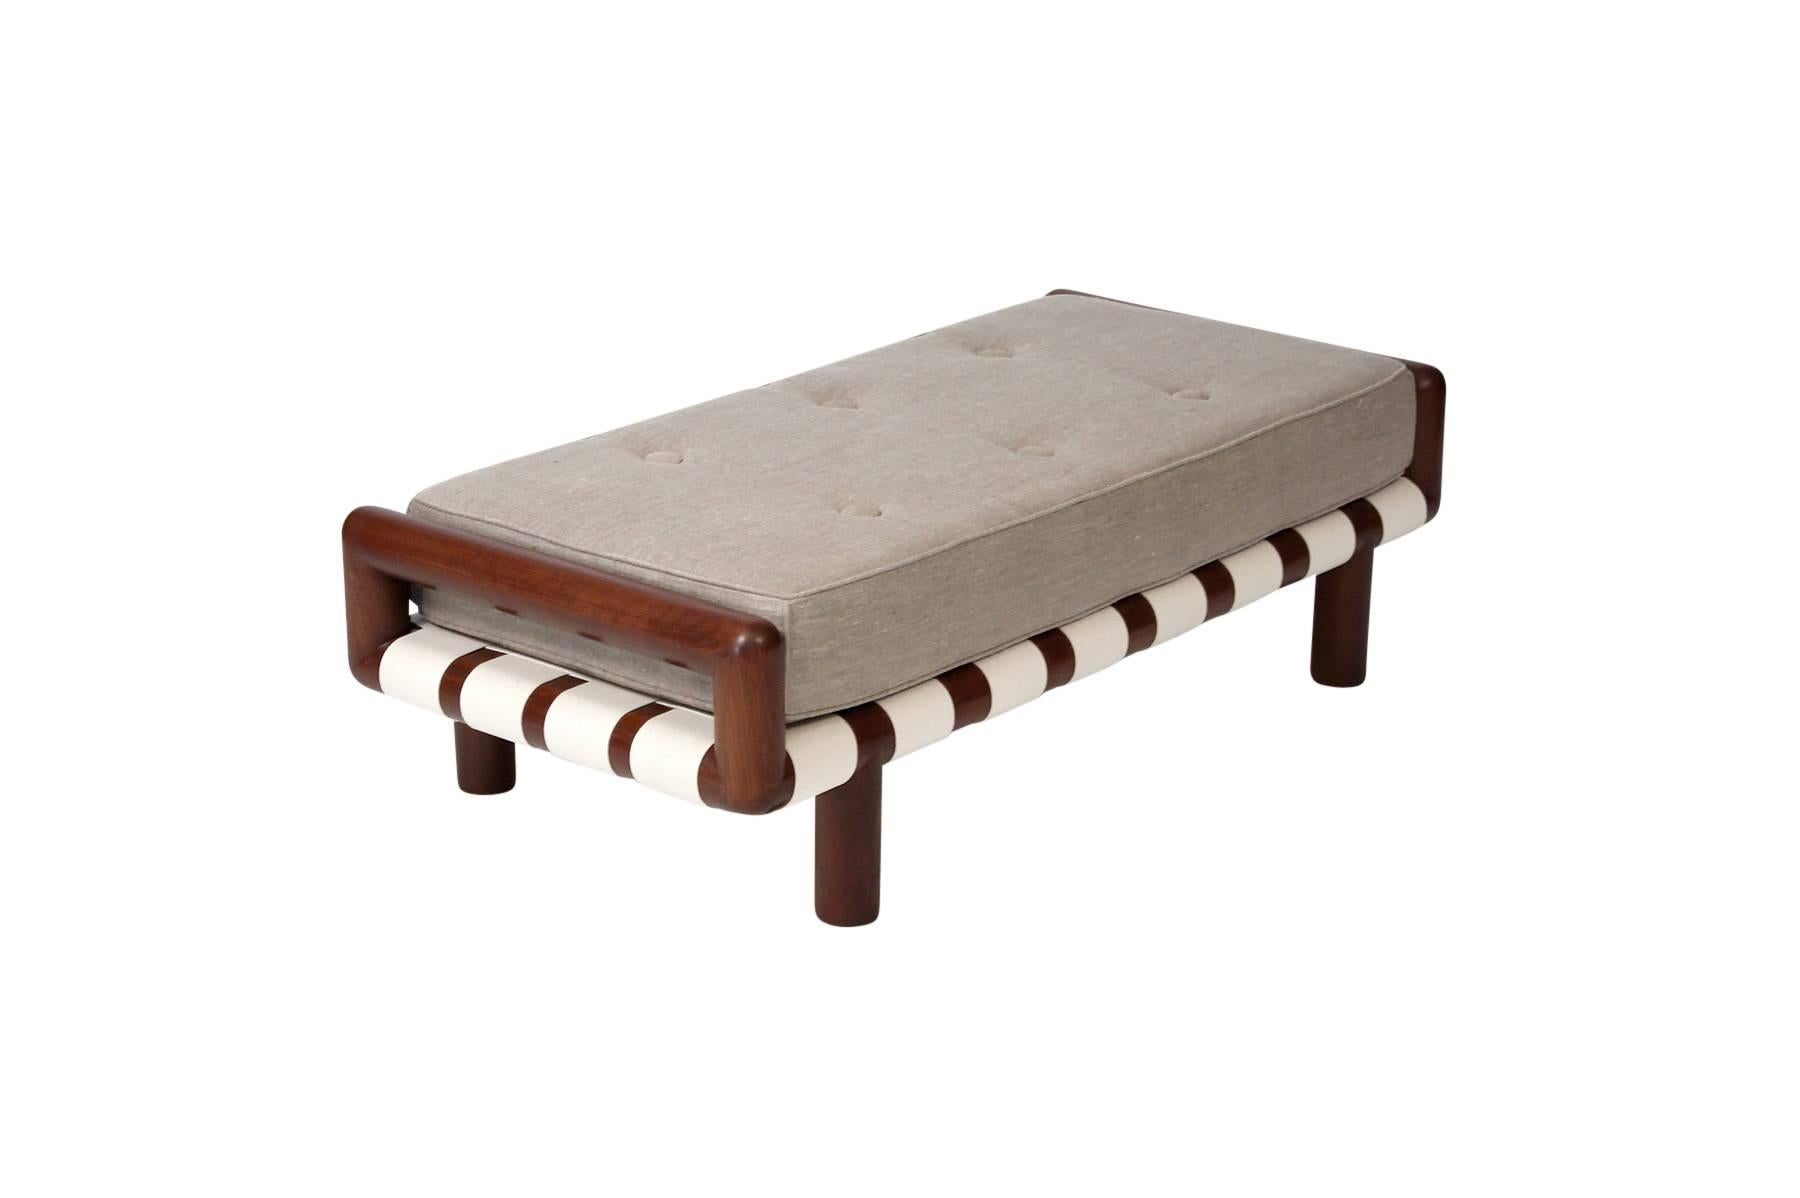 Large upholstered bench by T.H. Robsjohn-Gibbings for Widdicomb. Walnut frame with woven canvas strapping. Iconic series by the noted American designer.